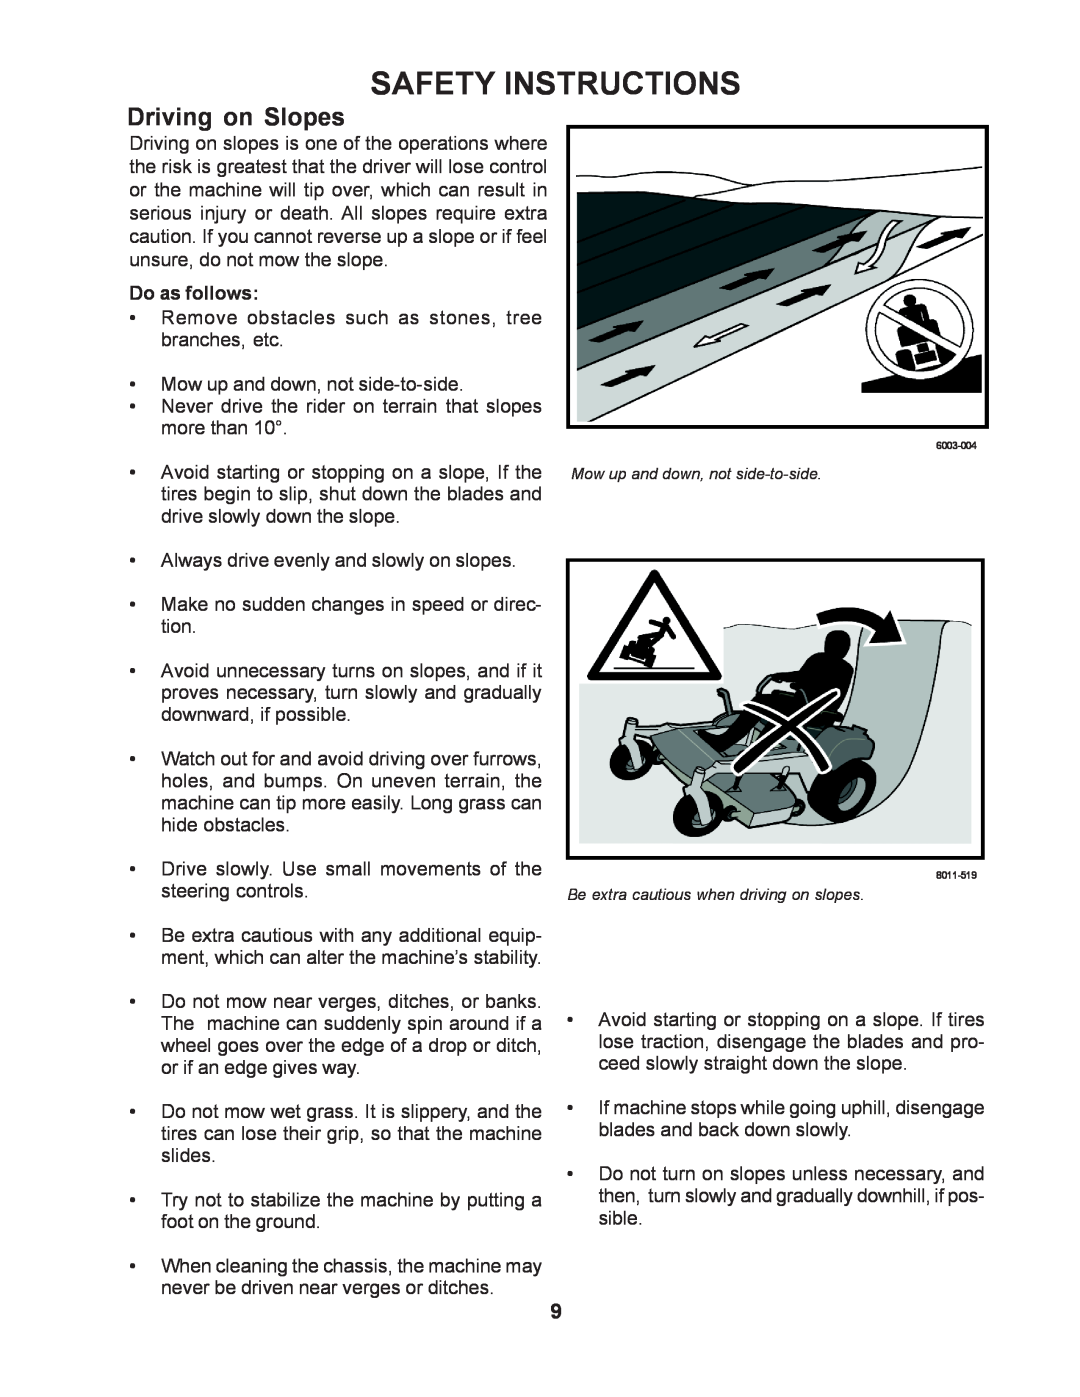 Yazoo/Kees ZMBI48181, ZMKW48191, ZMKW52211, ZMKW52231, ZMKH52231, ZMKW61231 manual Driving on Slopes, Safety Instructions 